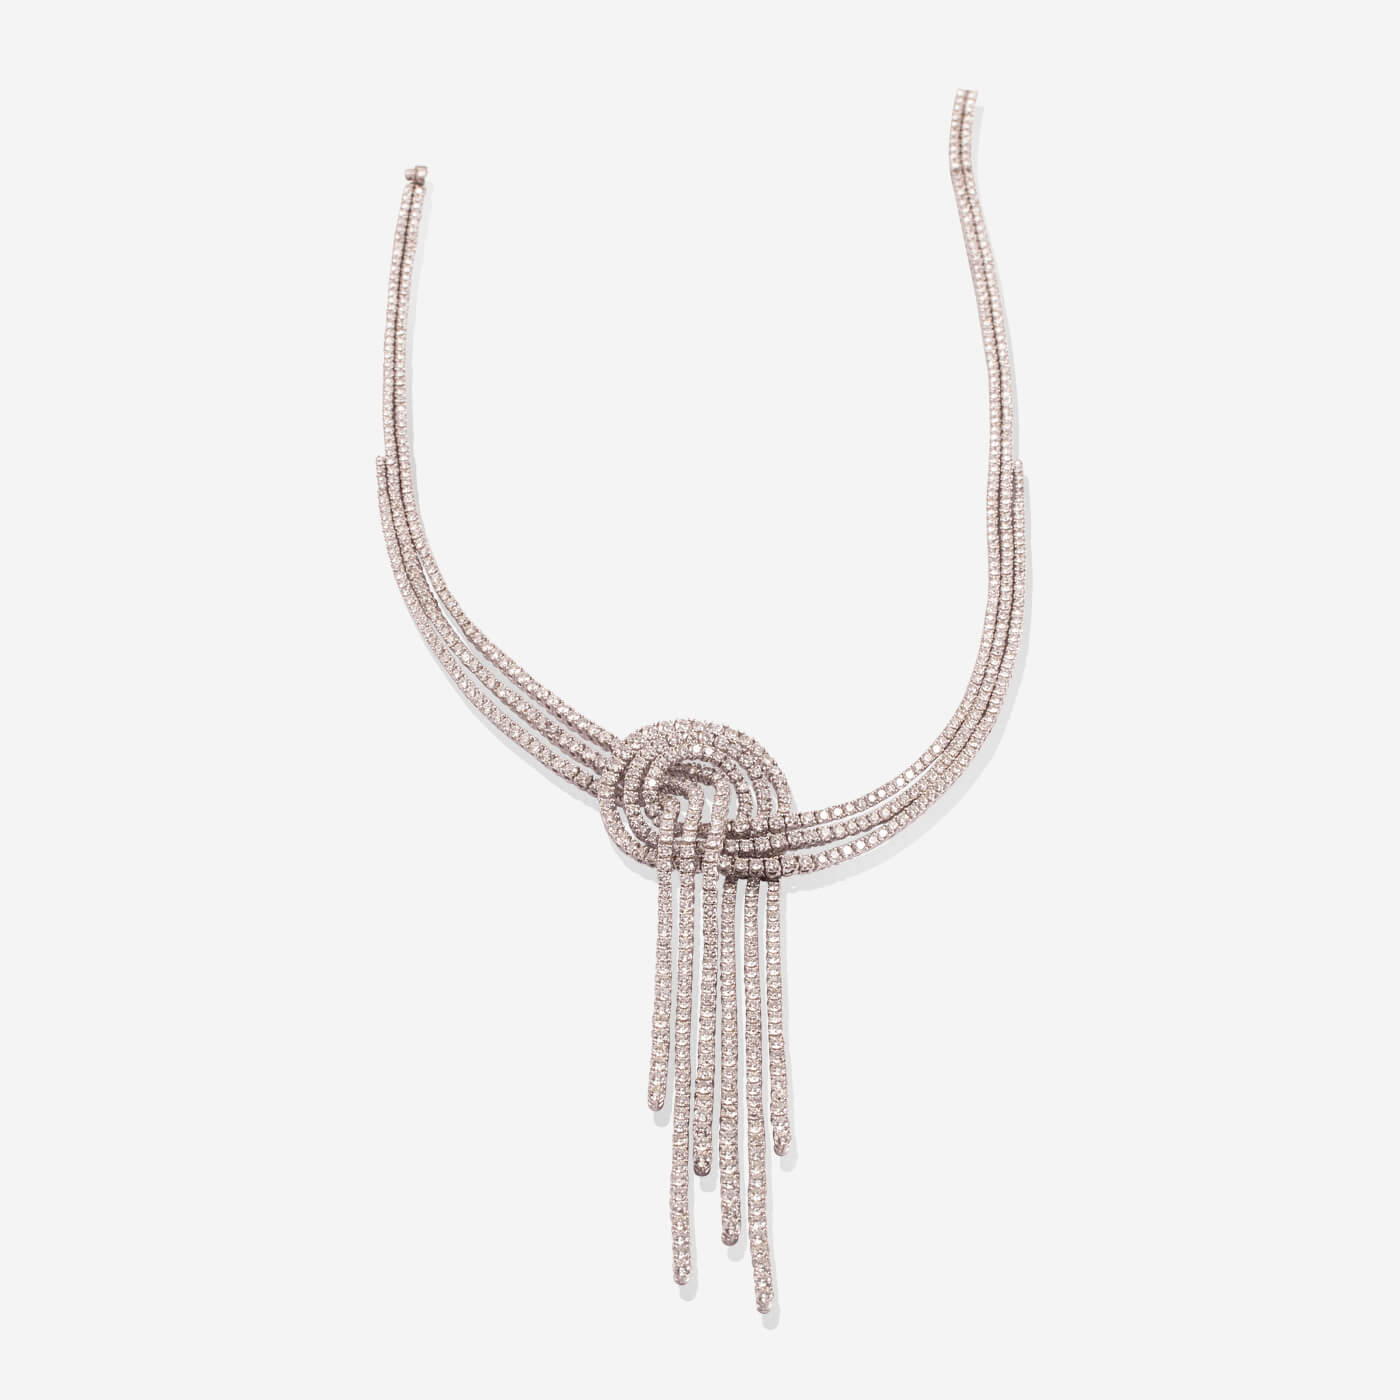 White Gold Big Knot With Diamonds Necklace - Ref: RG03587